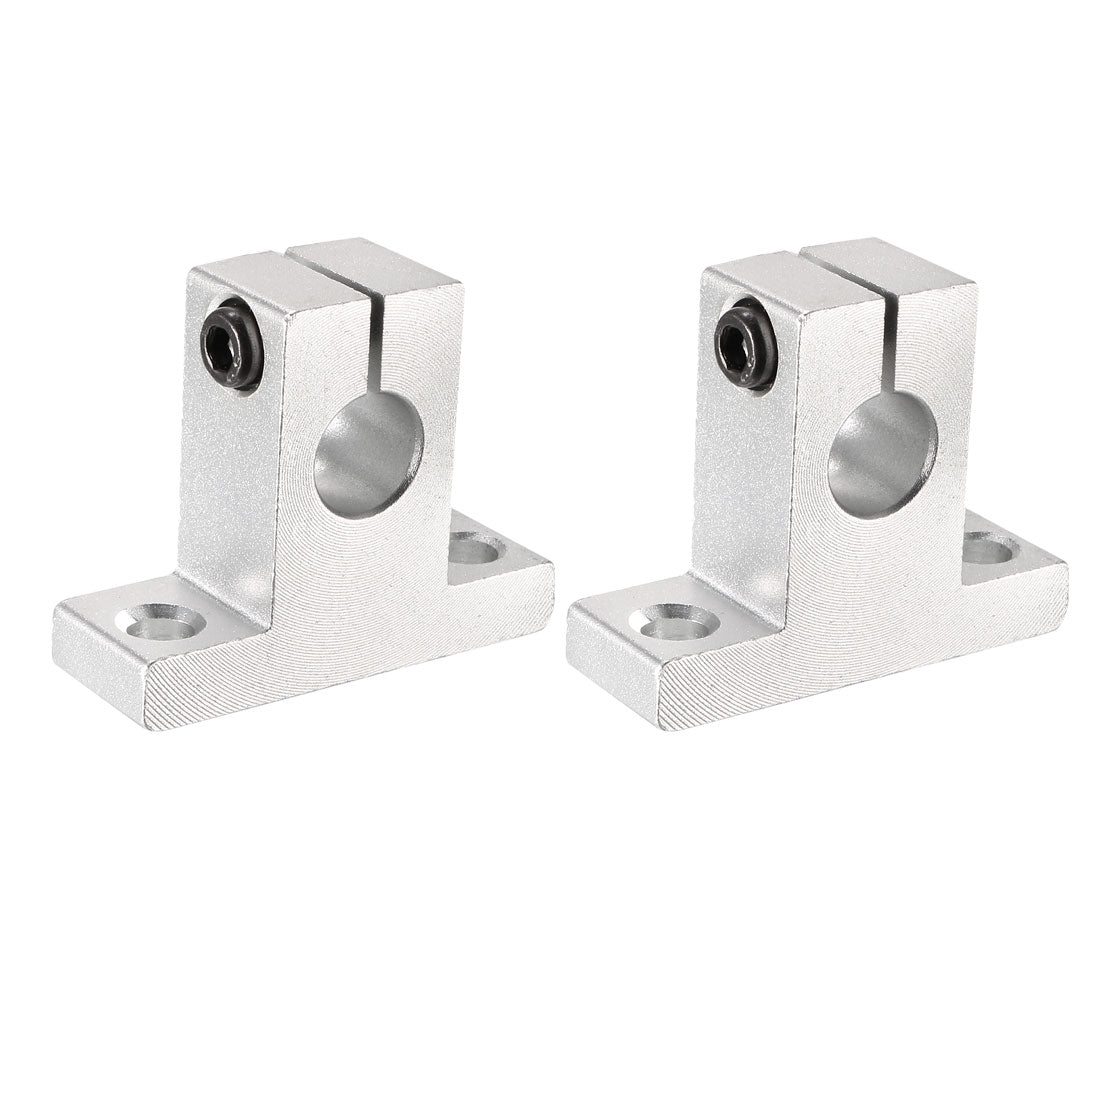 uxcell Uxcell 2PCS SK10 Linear Motion Rail Clamping Rod Rail Guide Support for 10mm Dia Shaft